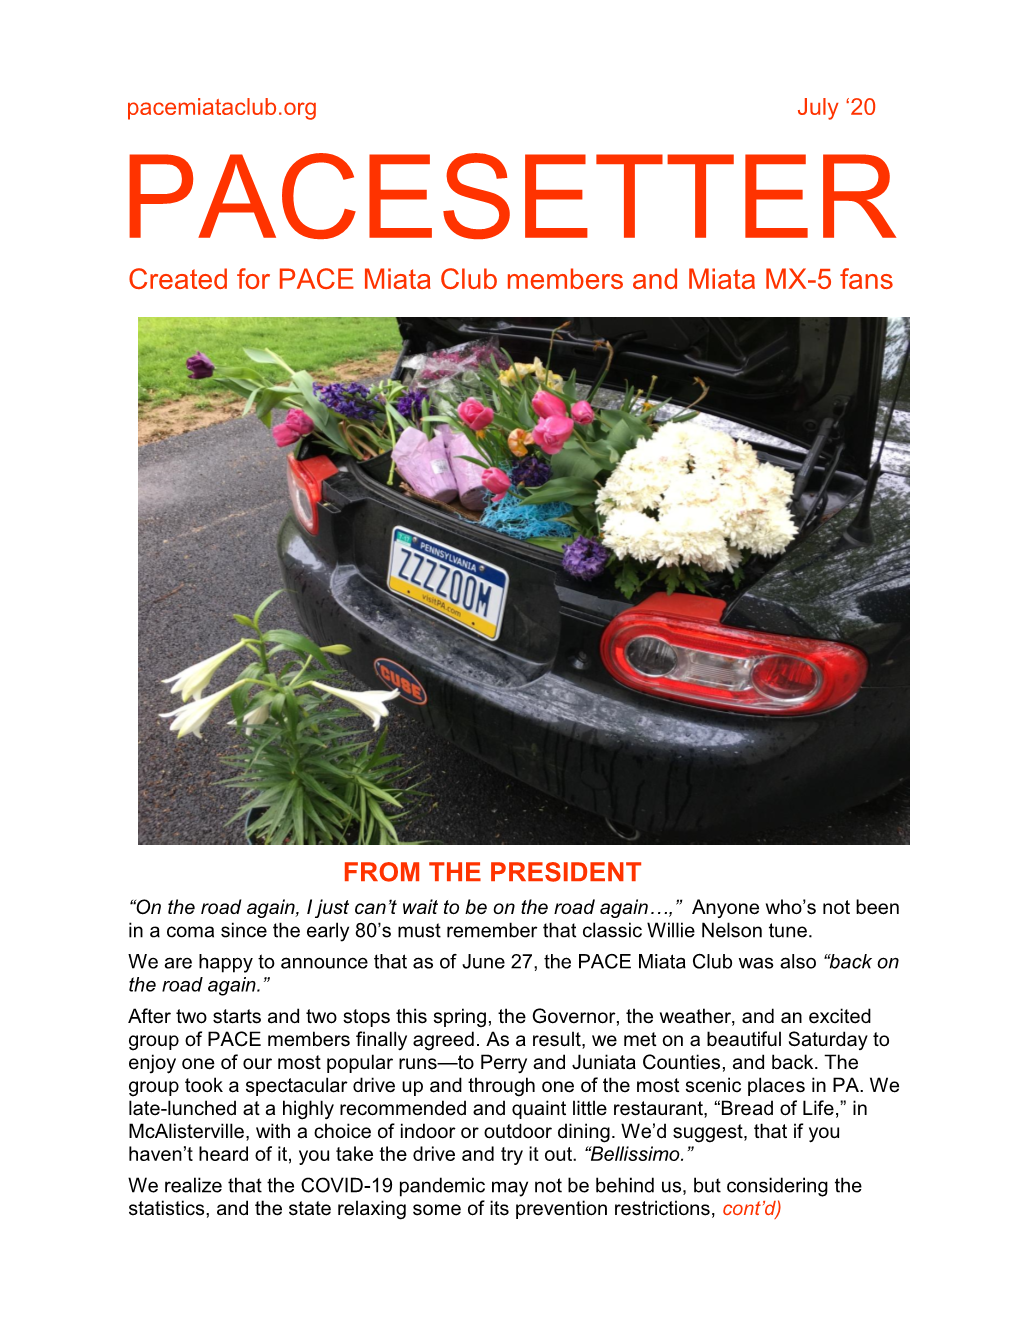 2020-07 Pacesetter